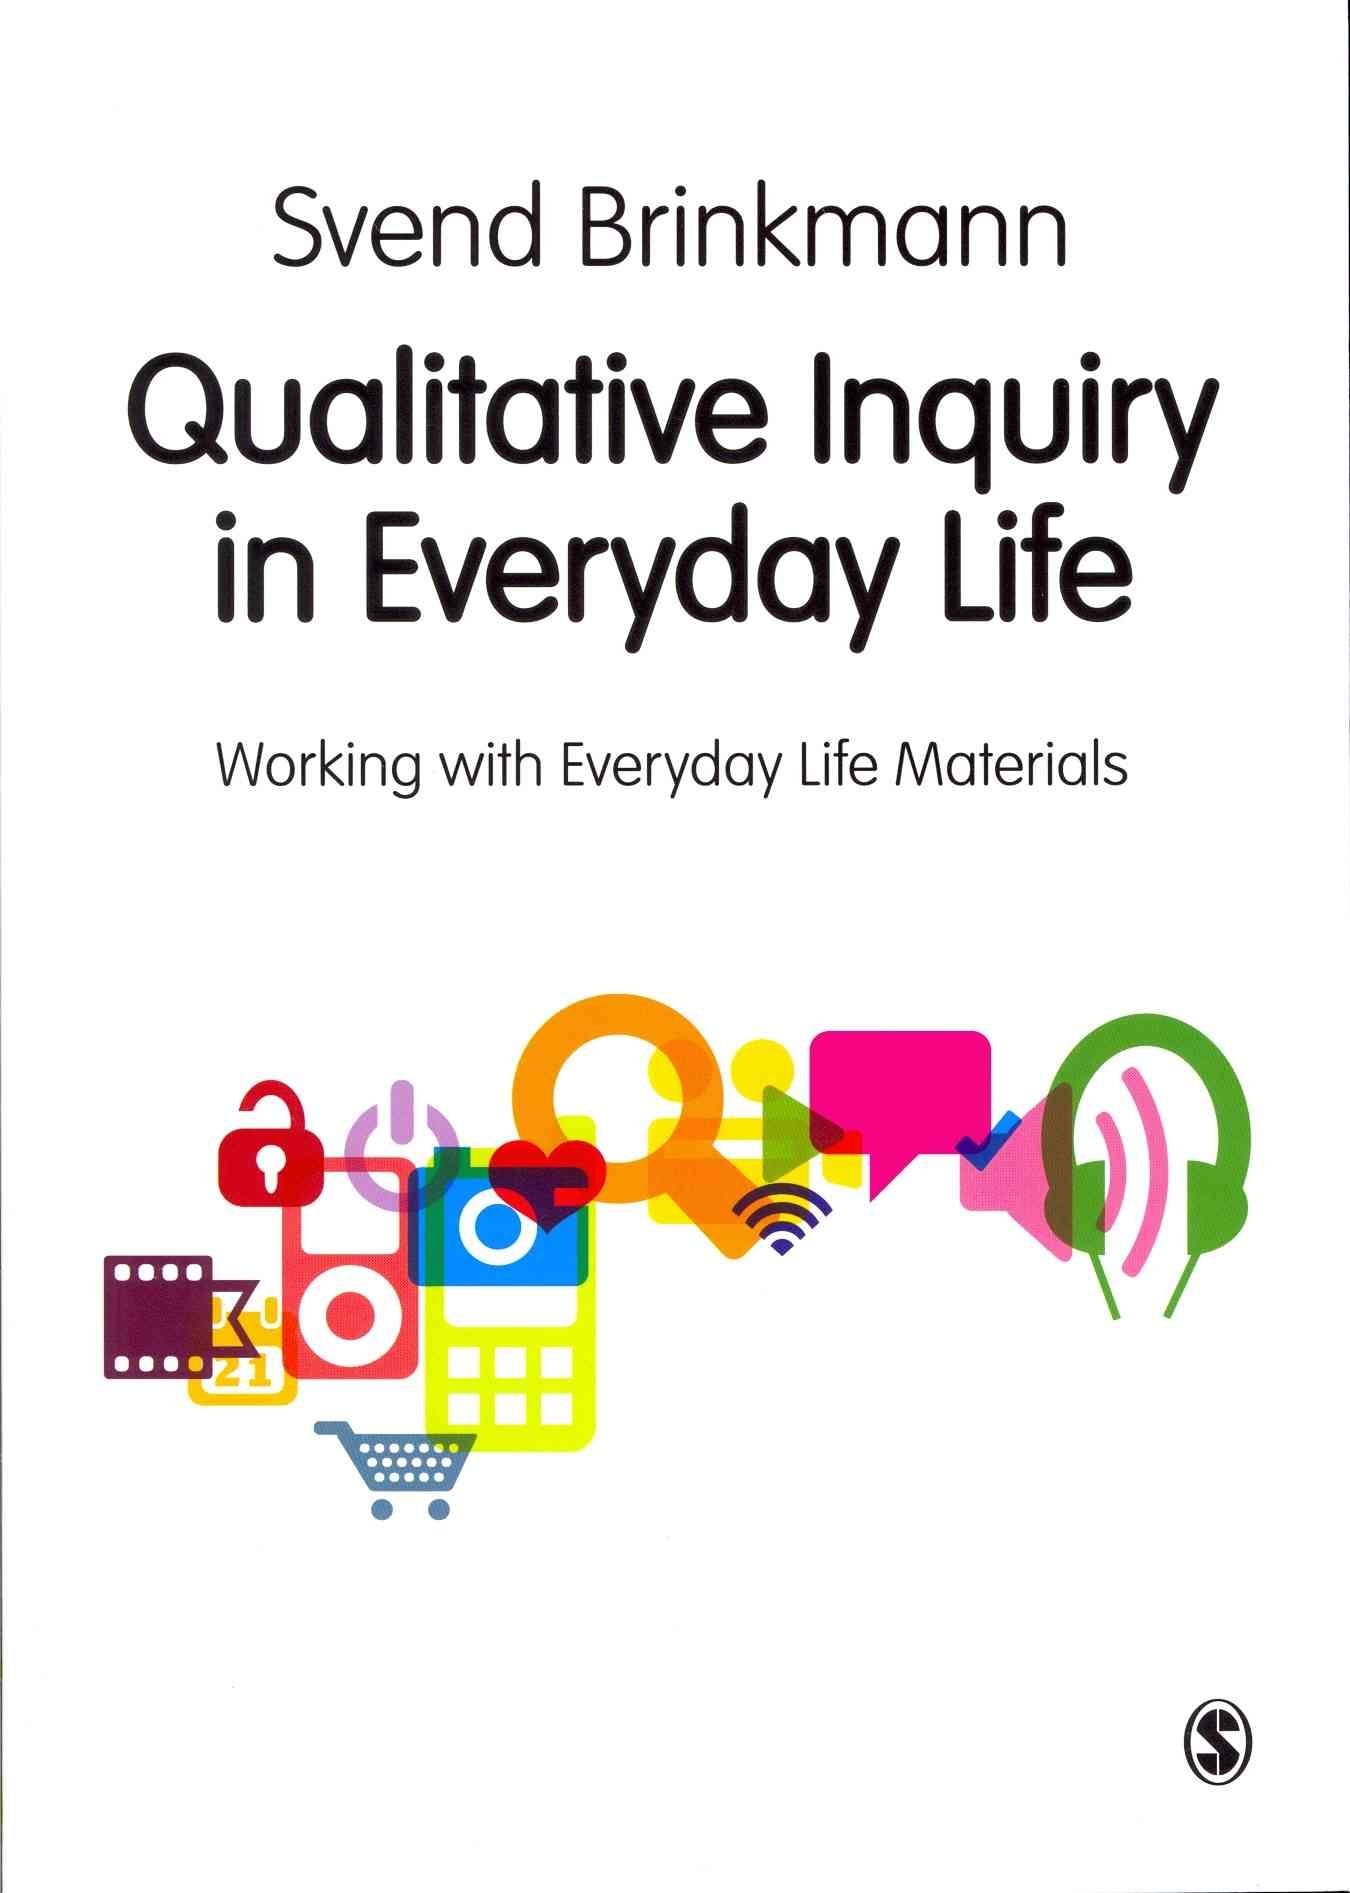 Inquiry　With　in　Delivery　Brinkmann　by　Everyday　Life　Svend　Free　Buy　Qualitative